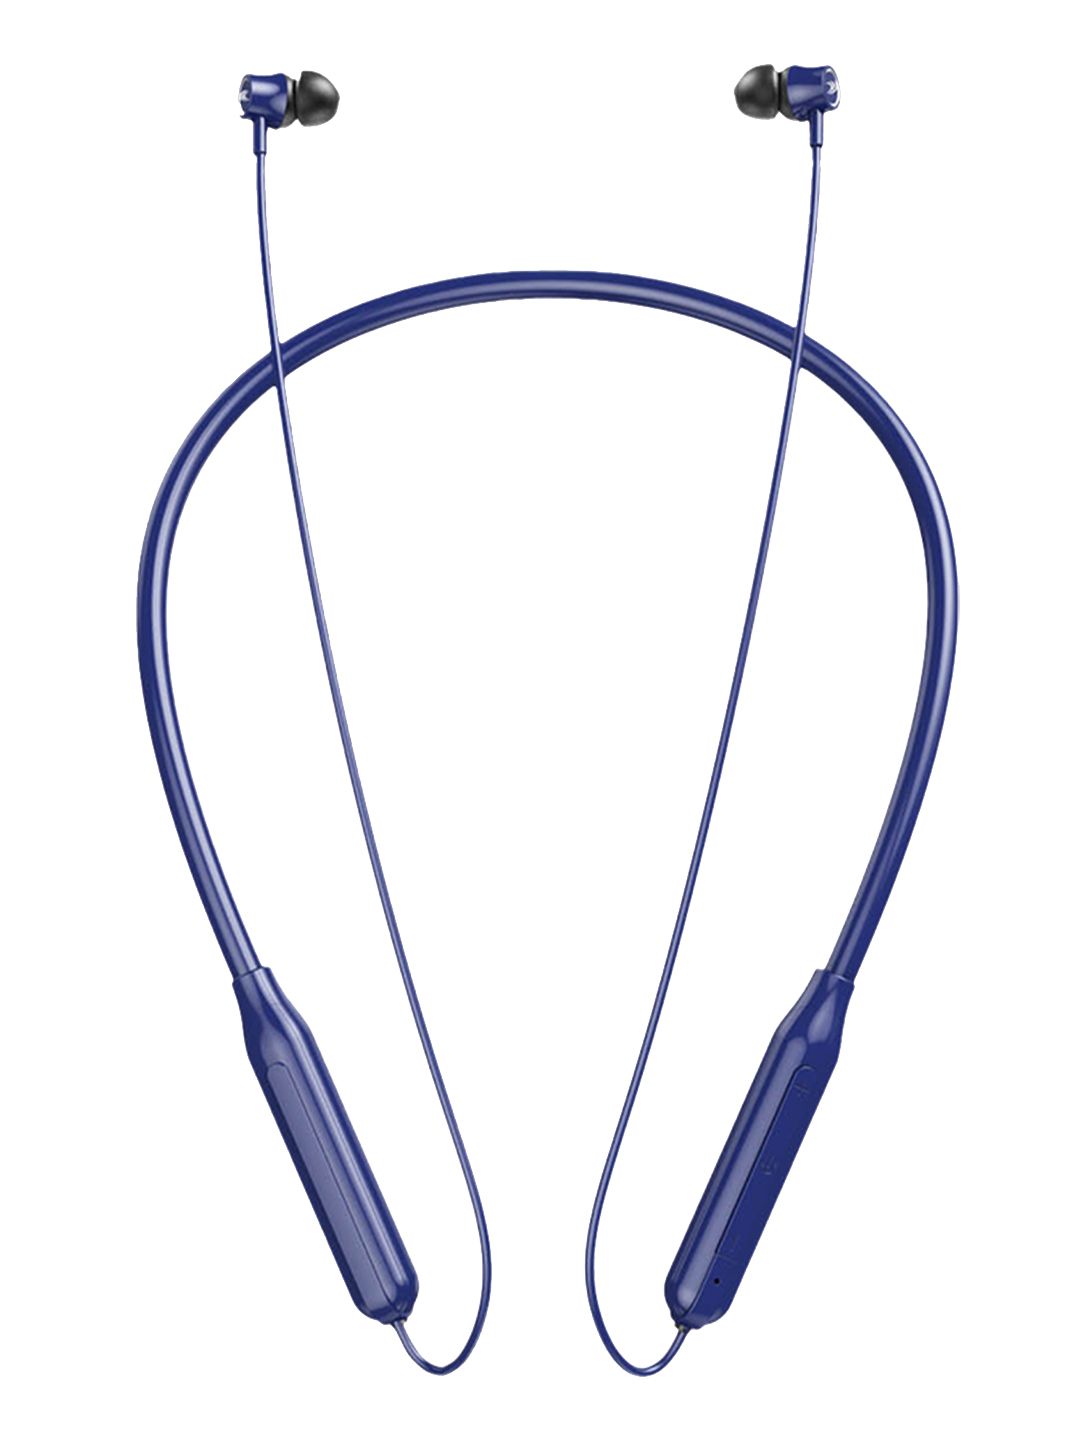 Cellecor  Blue Solid NK-3 Wireless Bluetooth Earphone Neckband Price in India